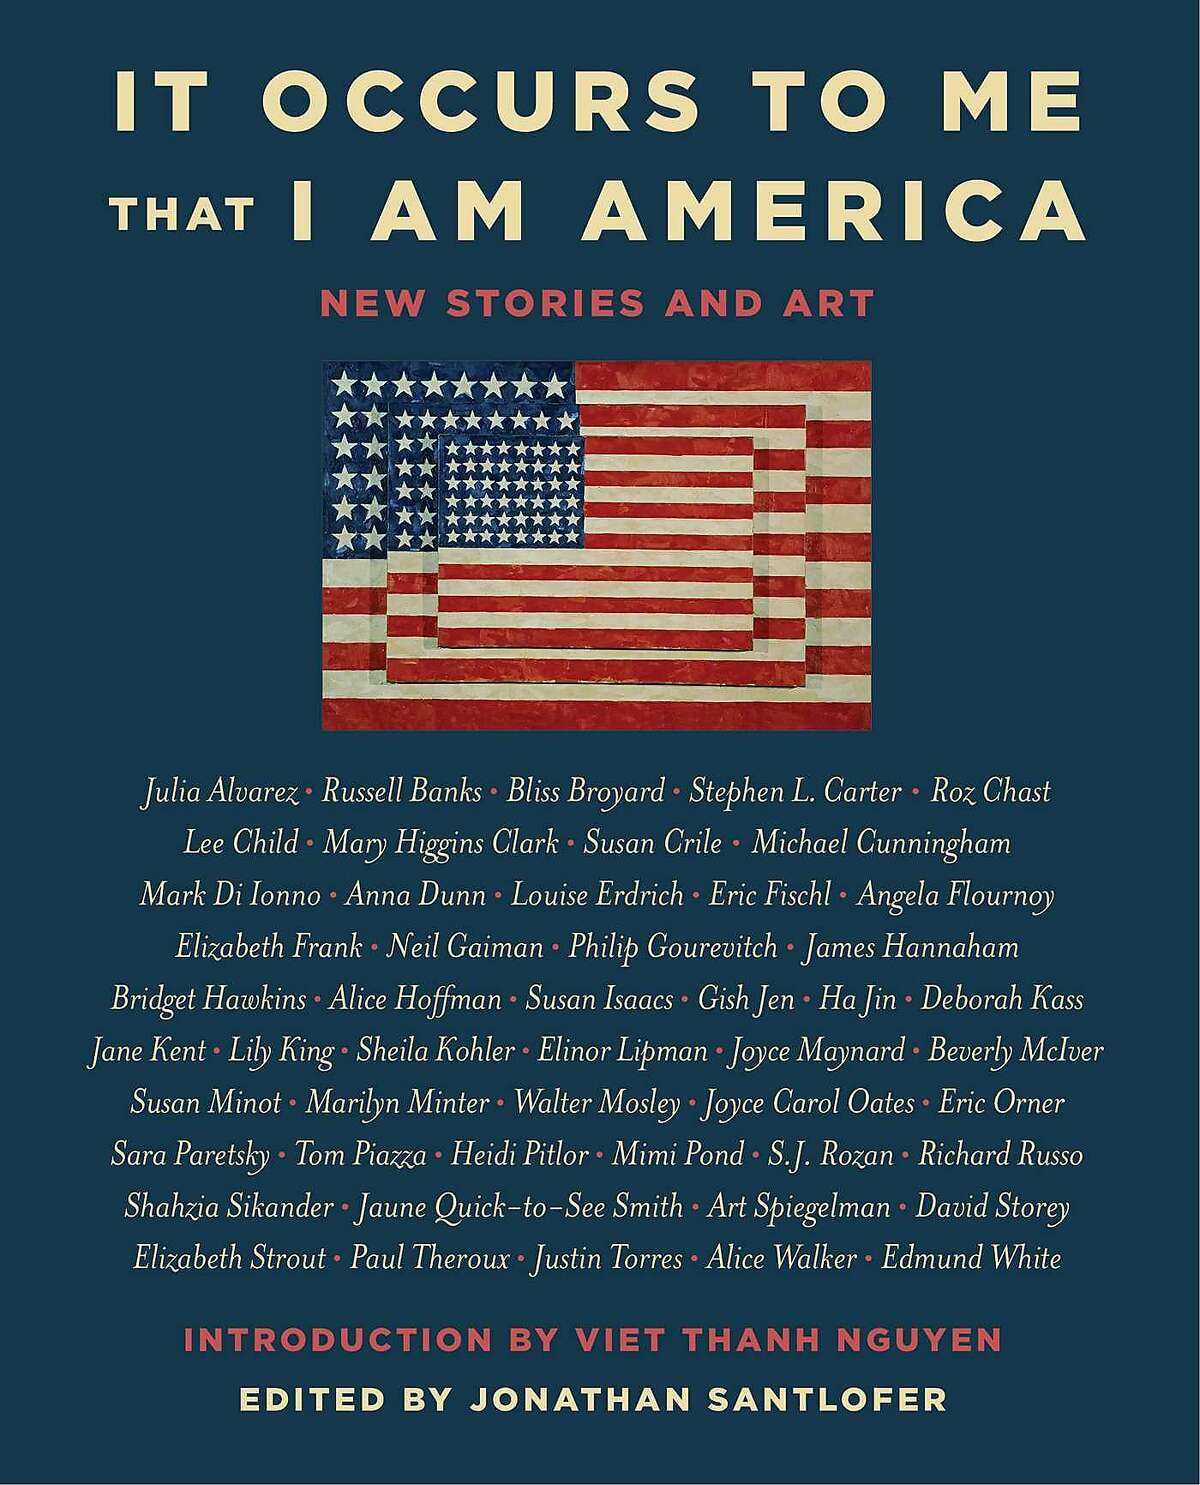 "It Occurs to Me That I Am America"